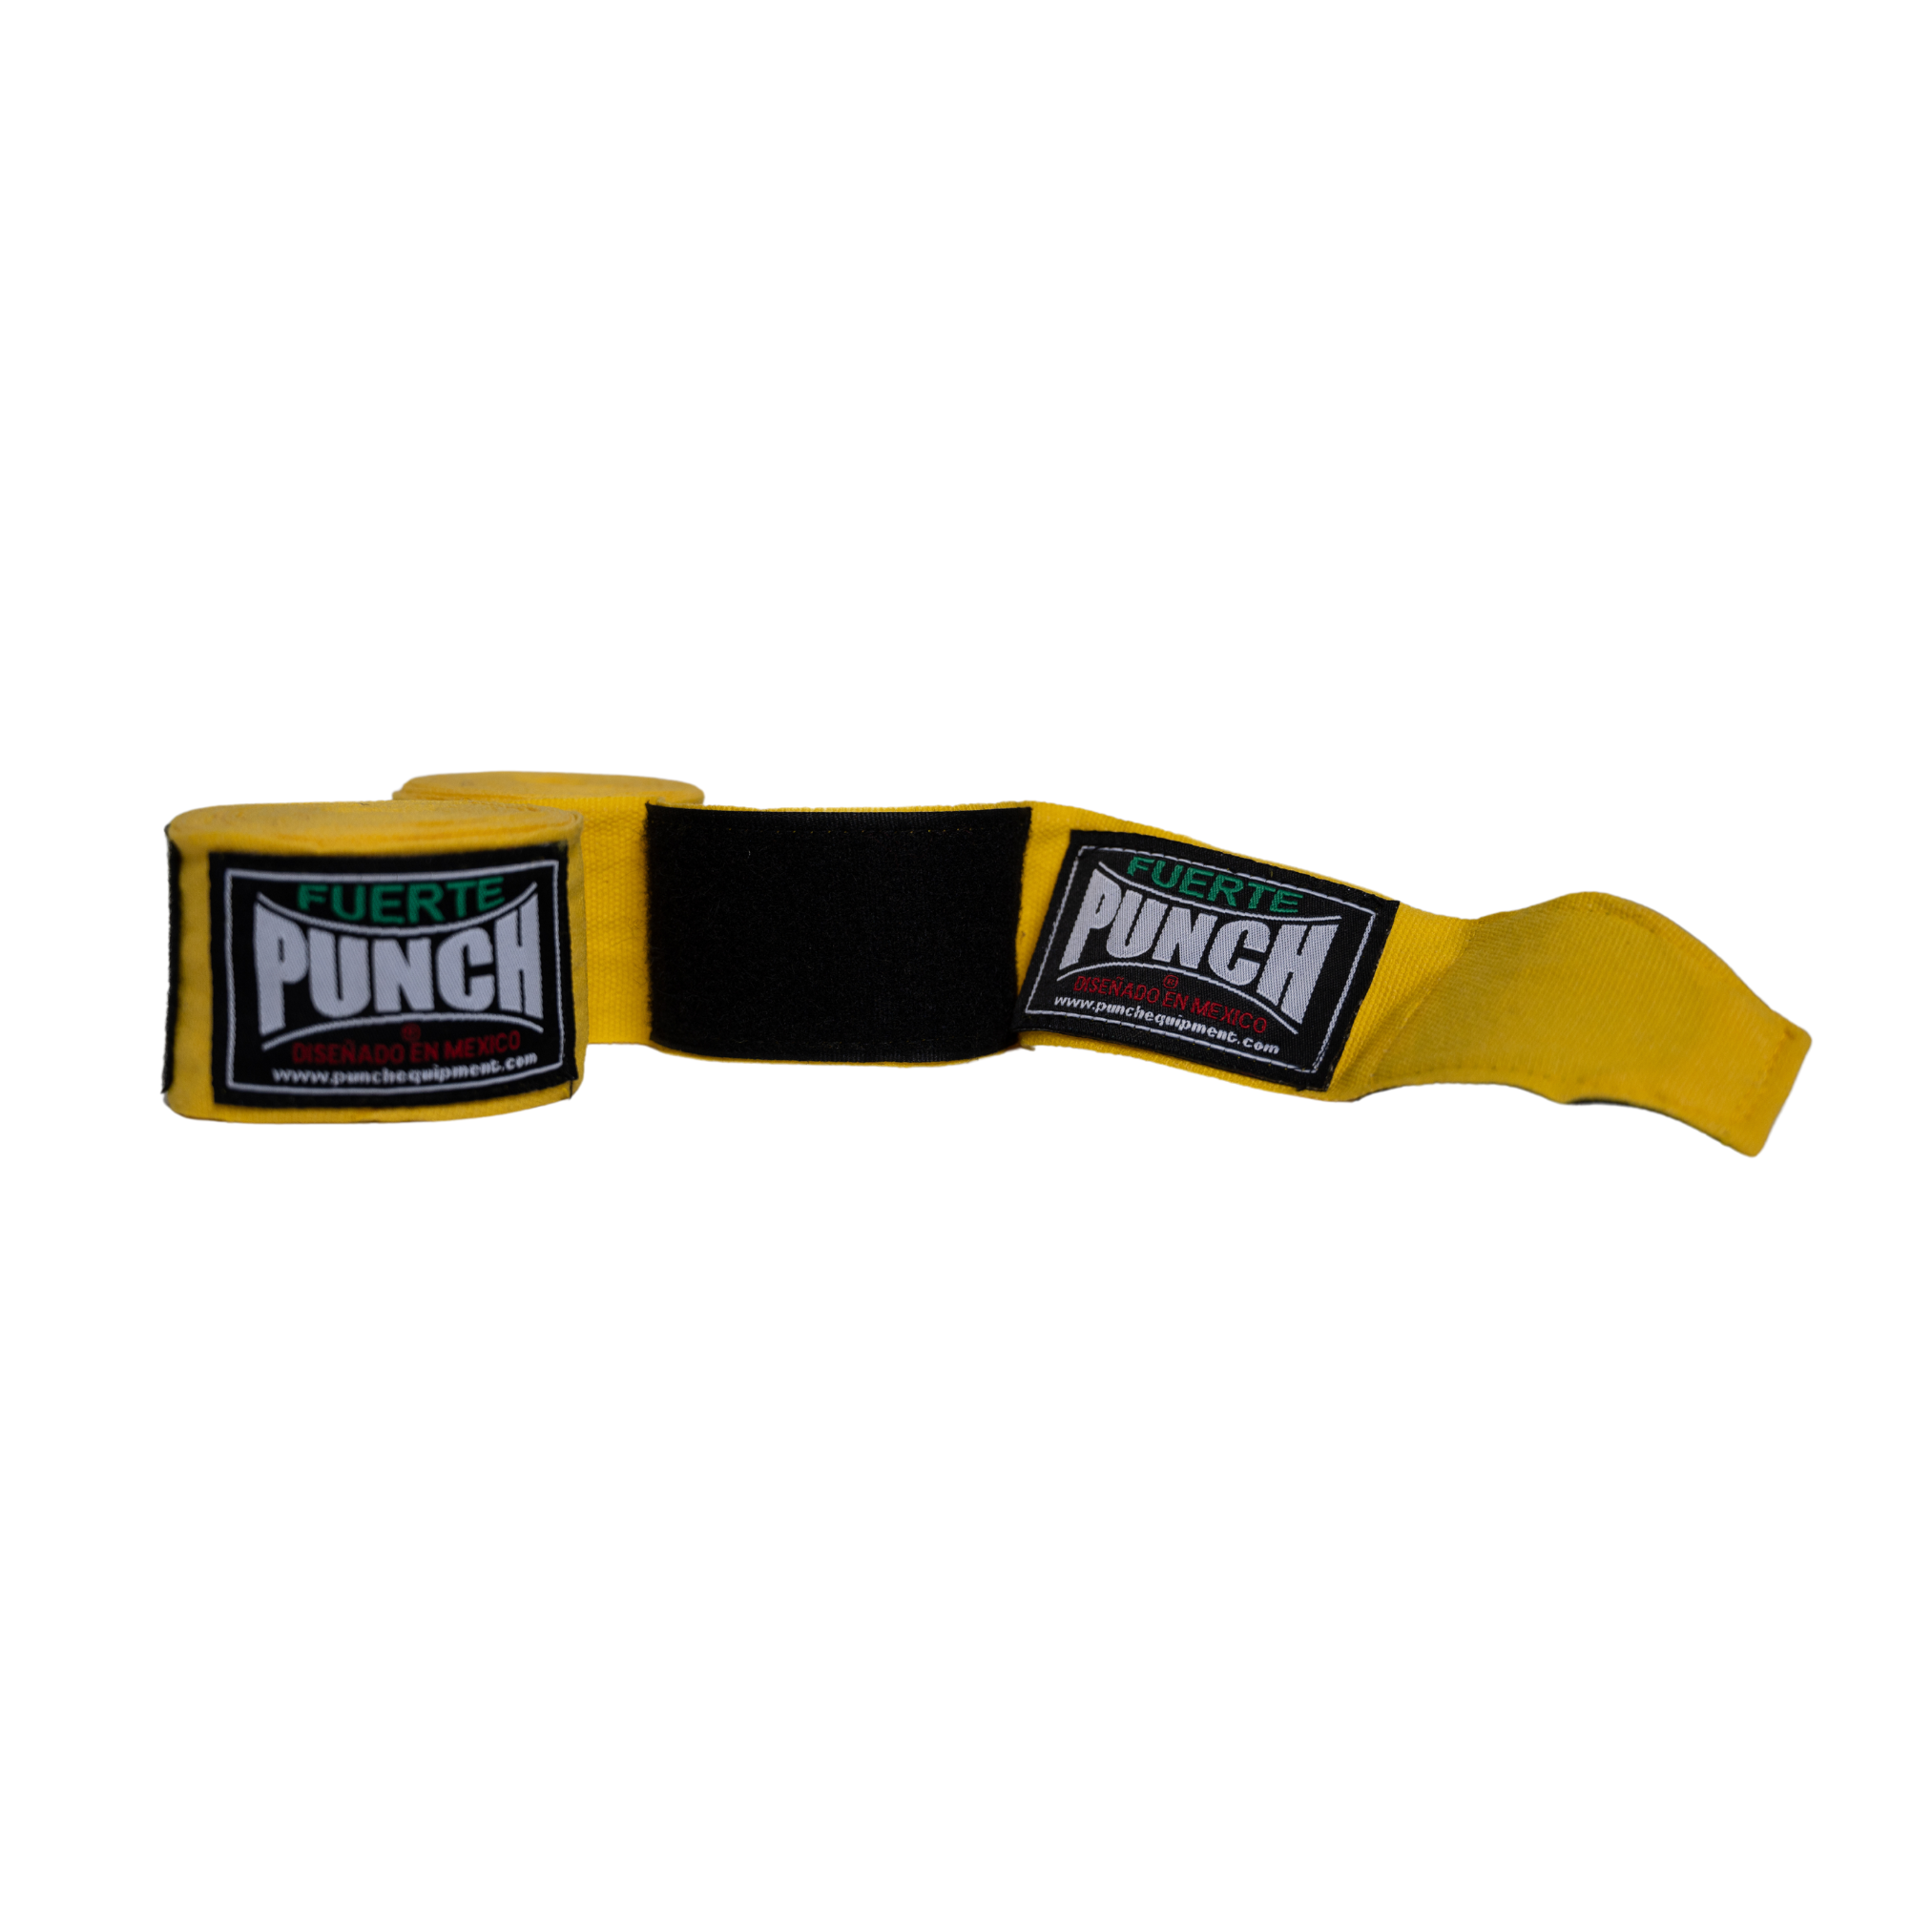 HAND WRAPS - Mexican™ ENDURO - 5m - BULK PACK of 10